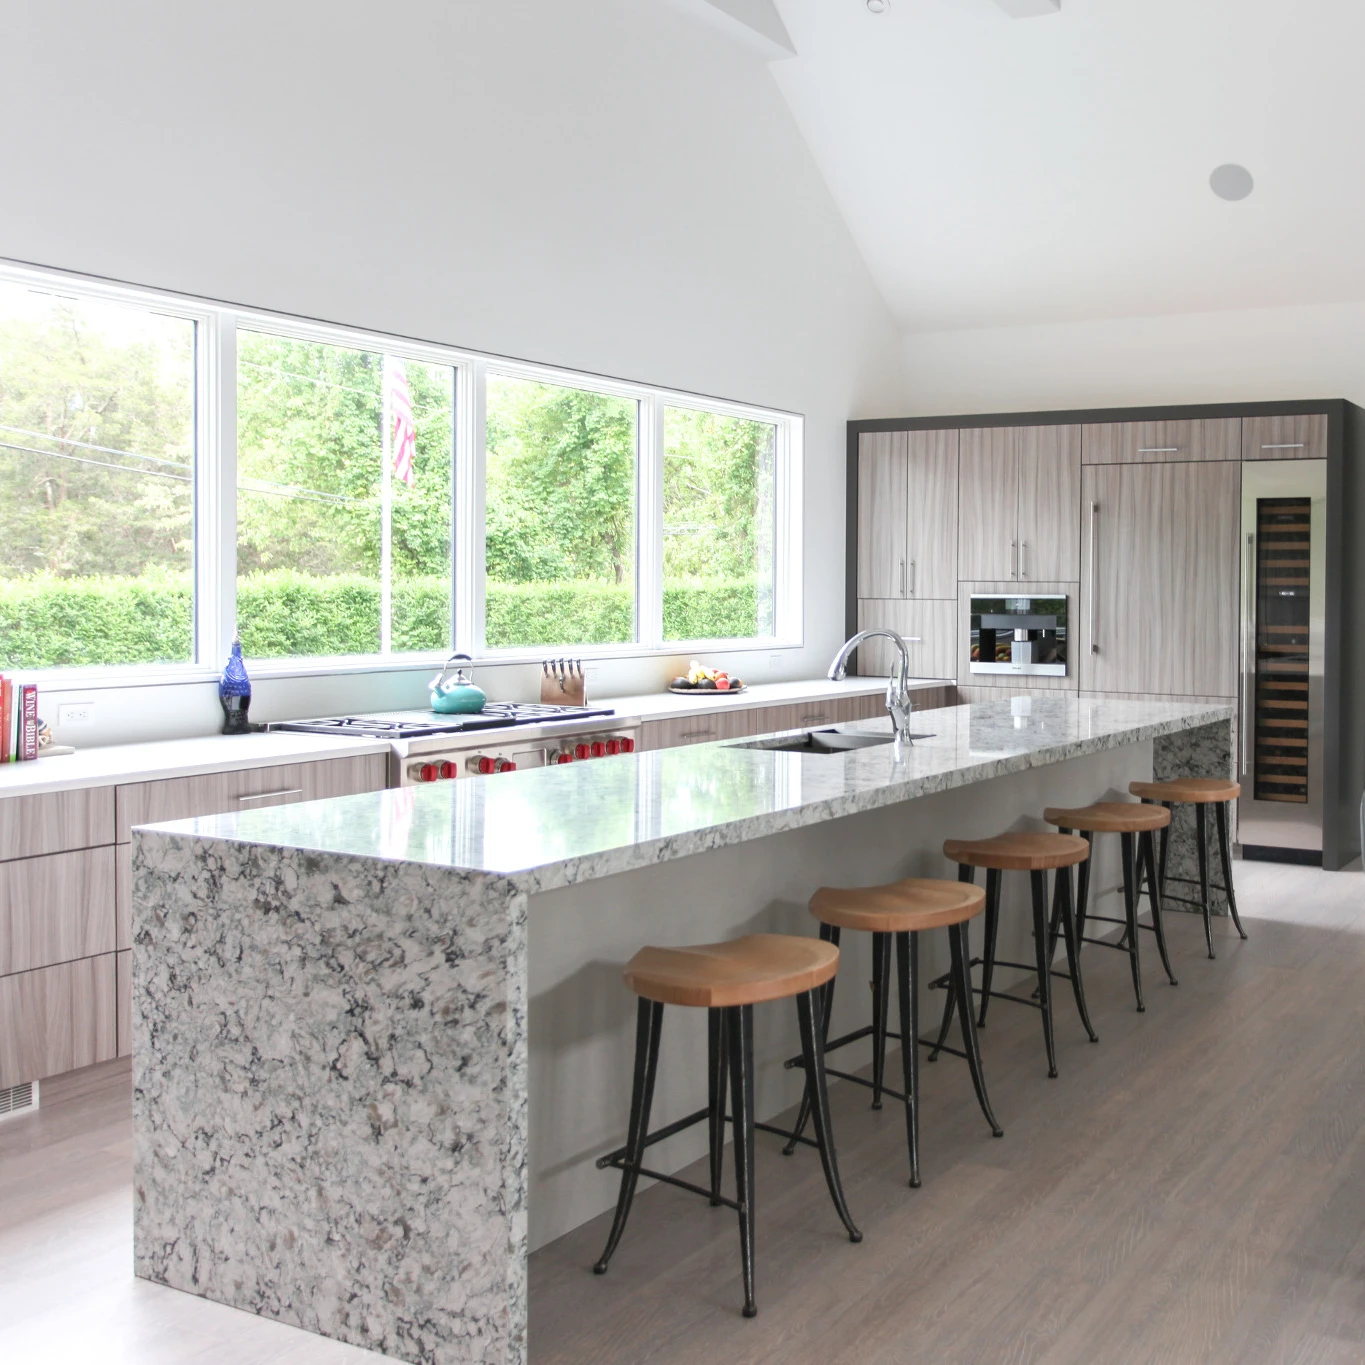 an open and airy kitchen with stunning waterfall-edge island topped with Cambria Praa Sands, a modern glass dining table with plenty of seating, and large windows overlooking a lush garden.